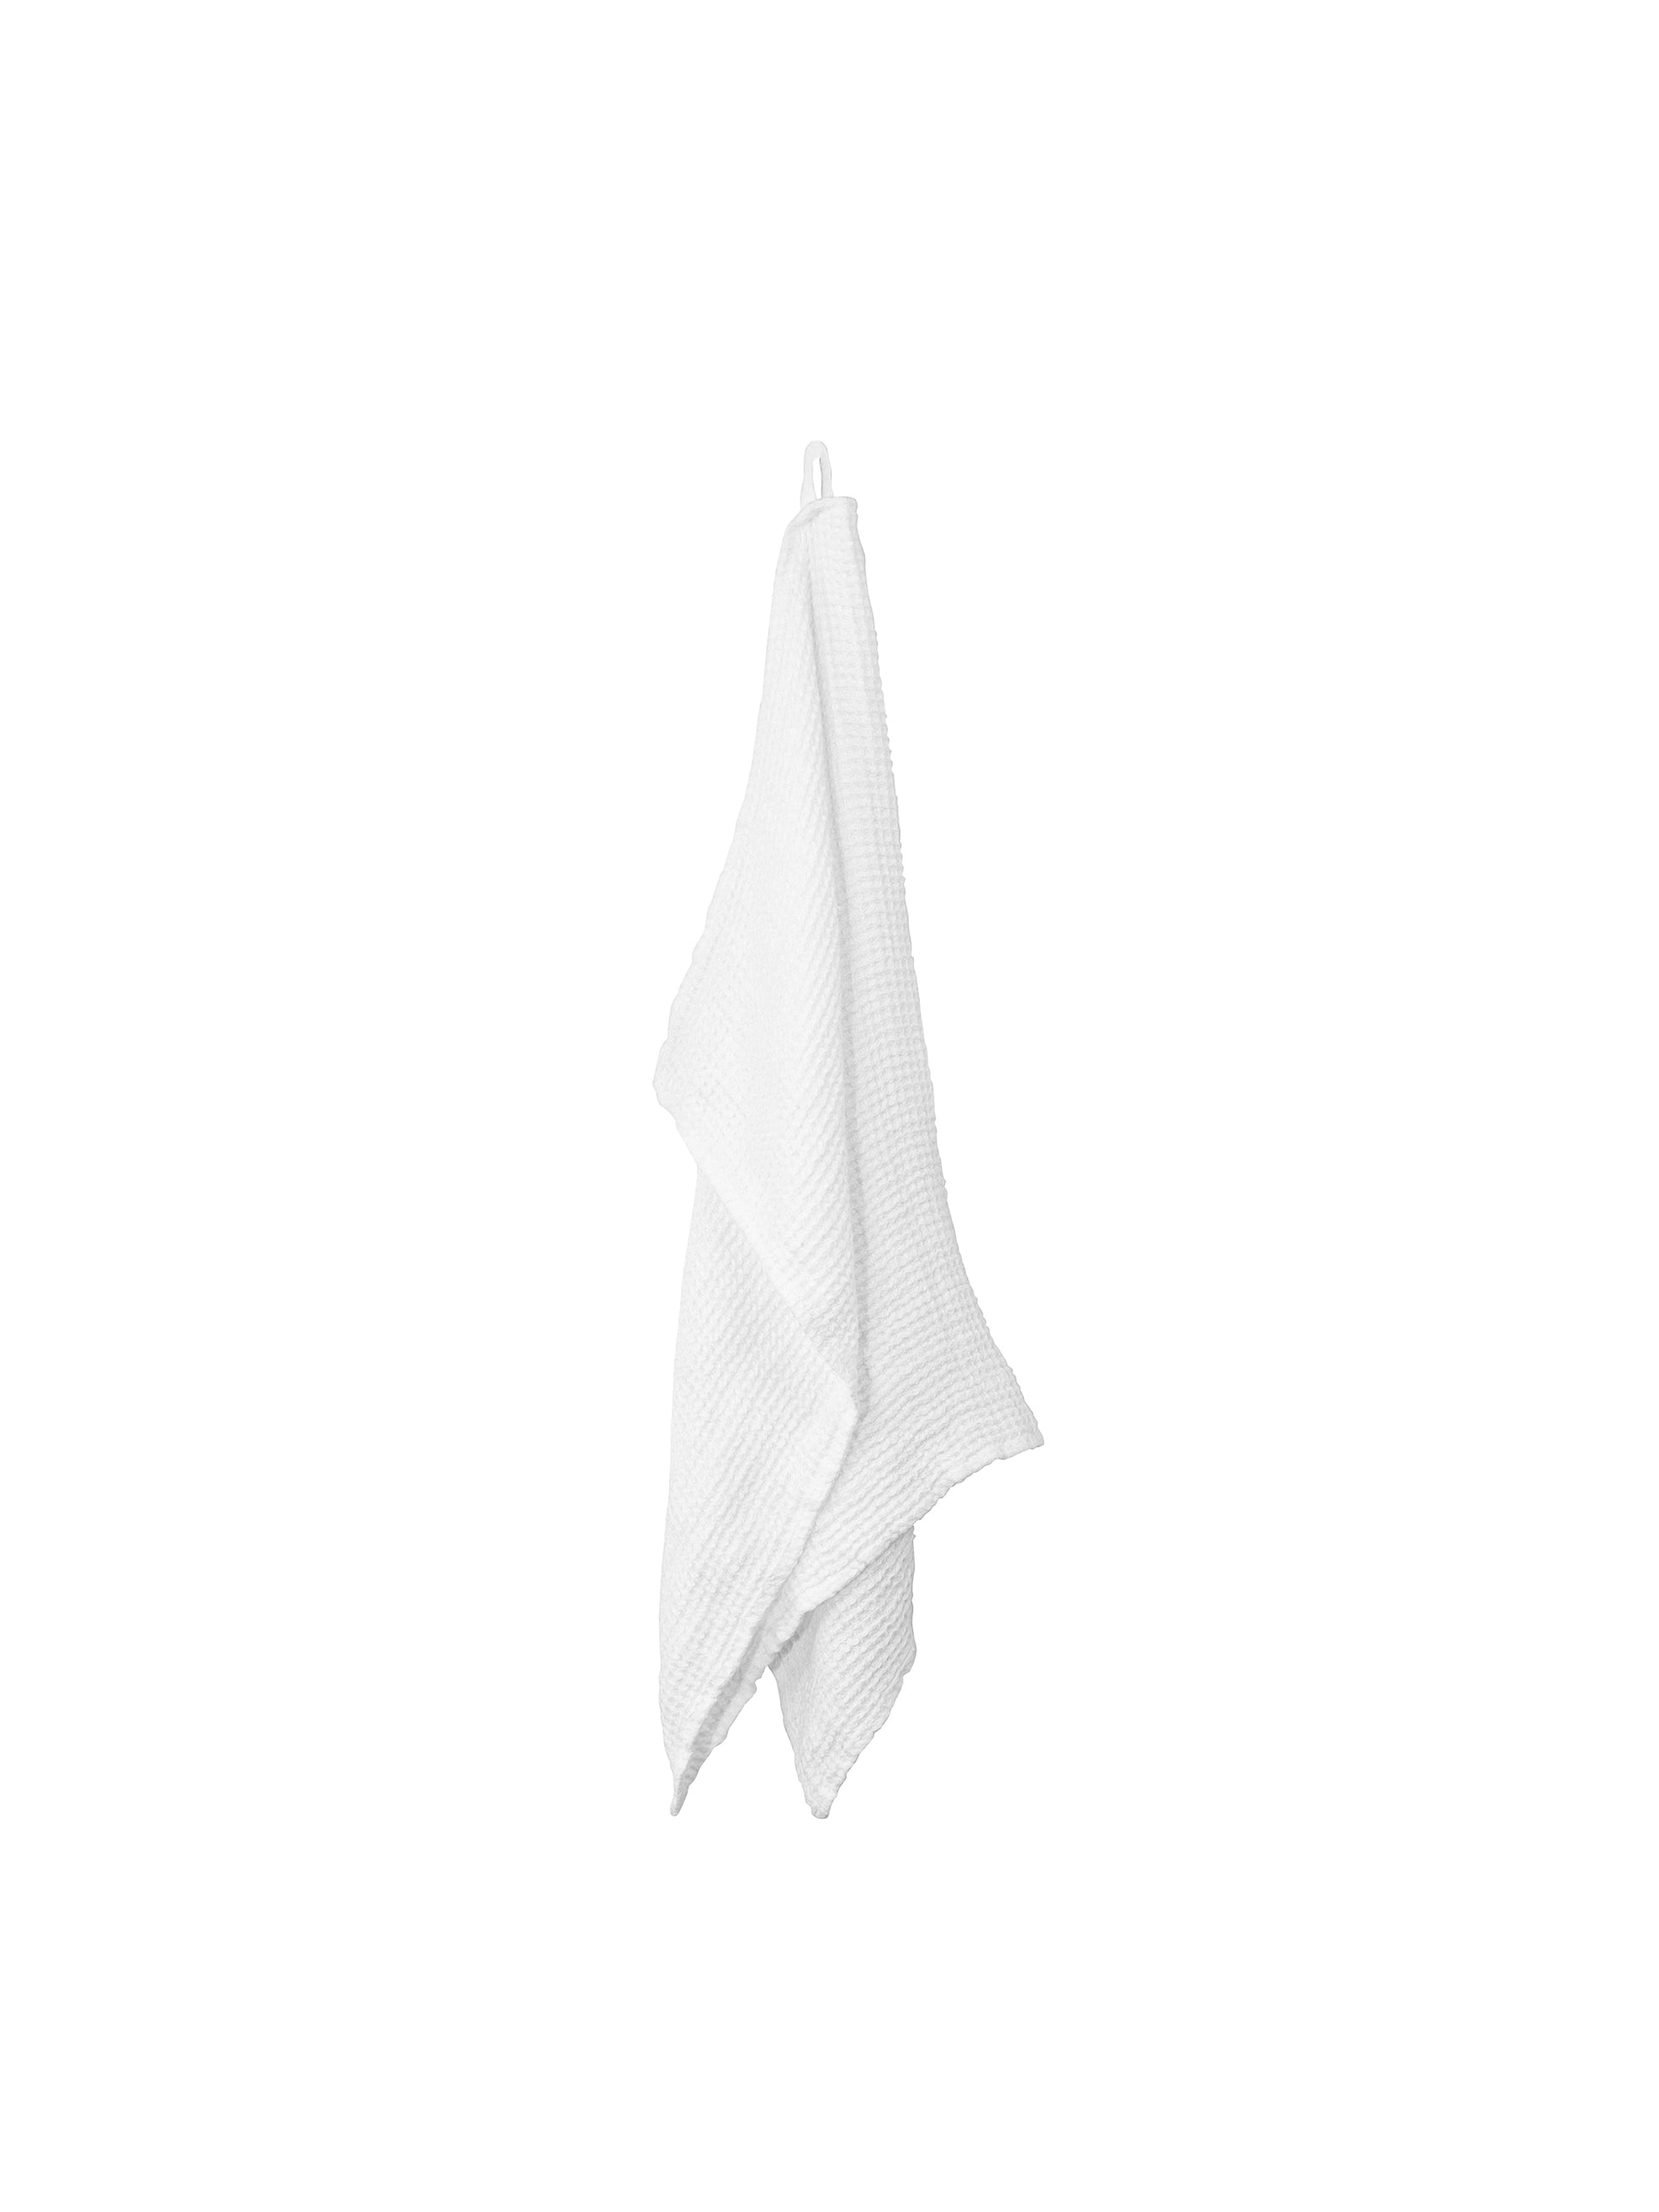 Shop the European White Luxury Waffle Weave Towel Collection at Weston Table